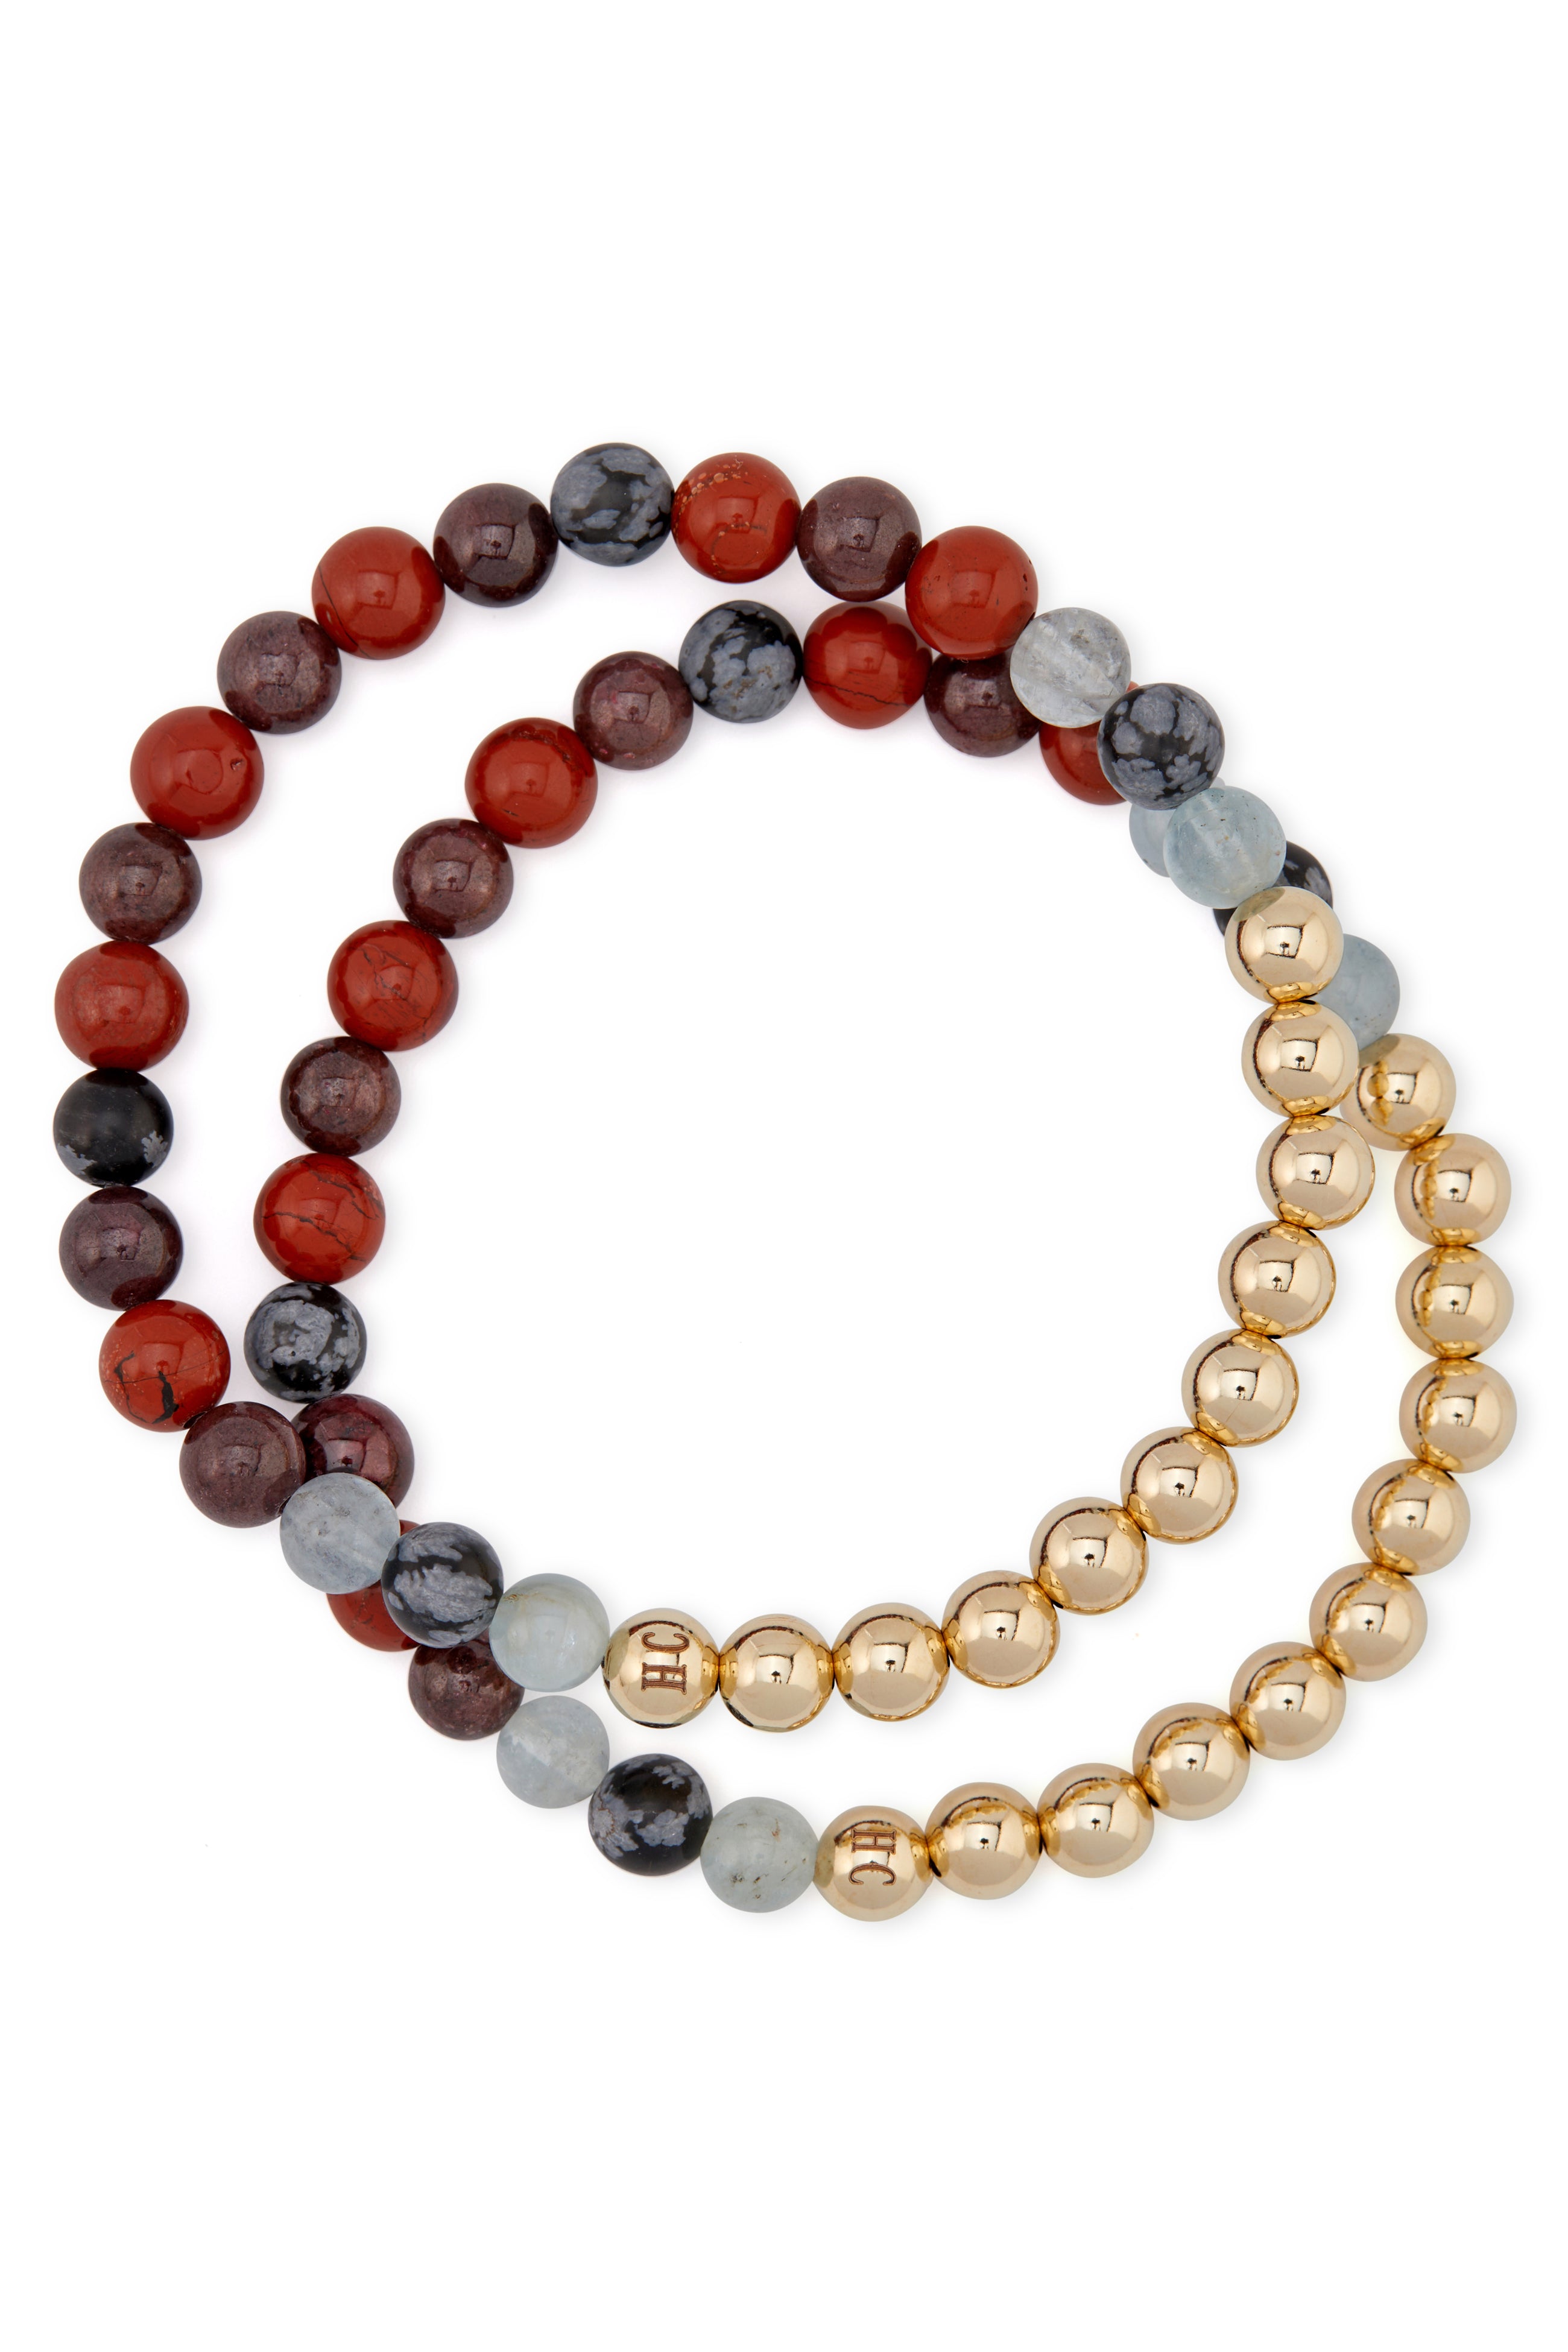 Lava 7 Chakra Natural Stone Hamsa Bracelet with MagSnap FOR MEN by MESMERIZE